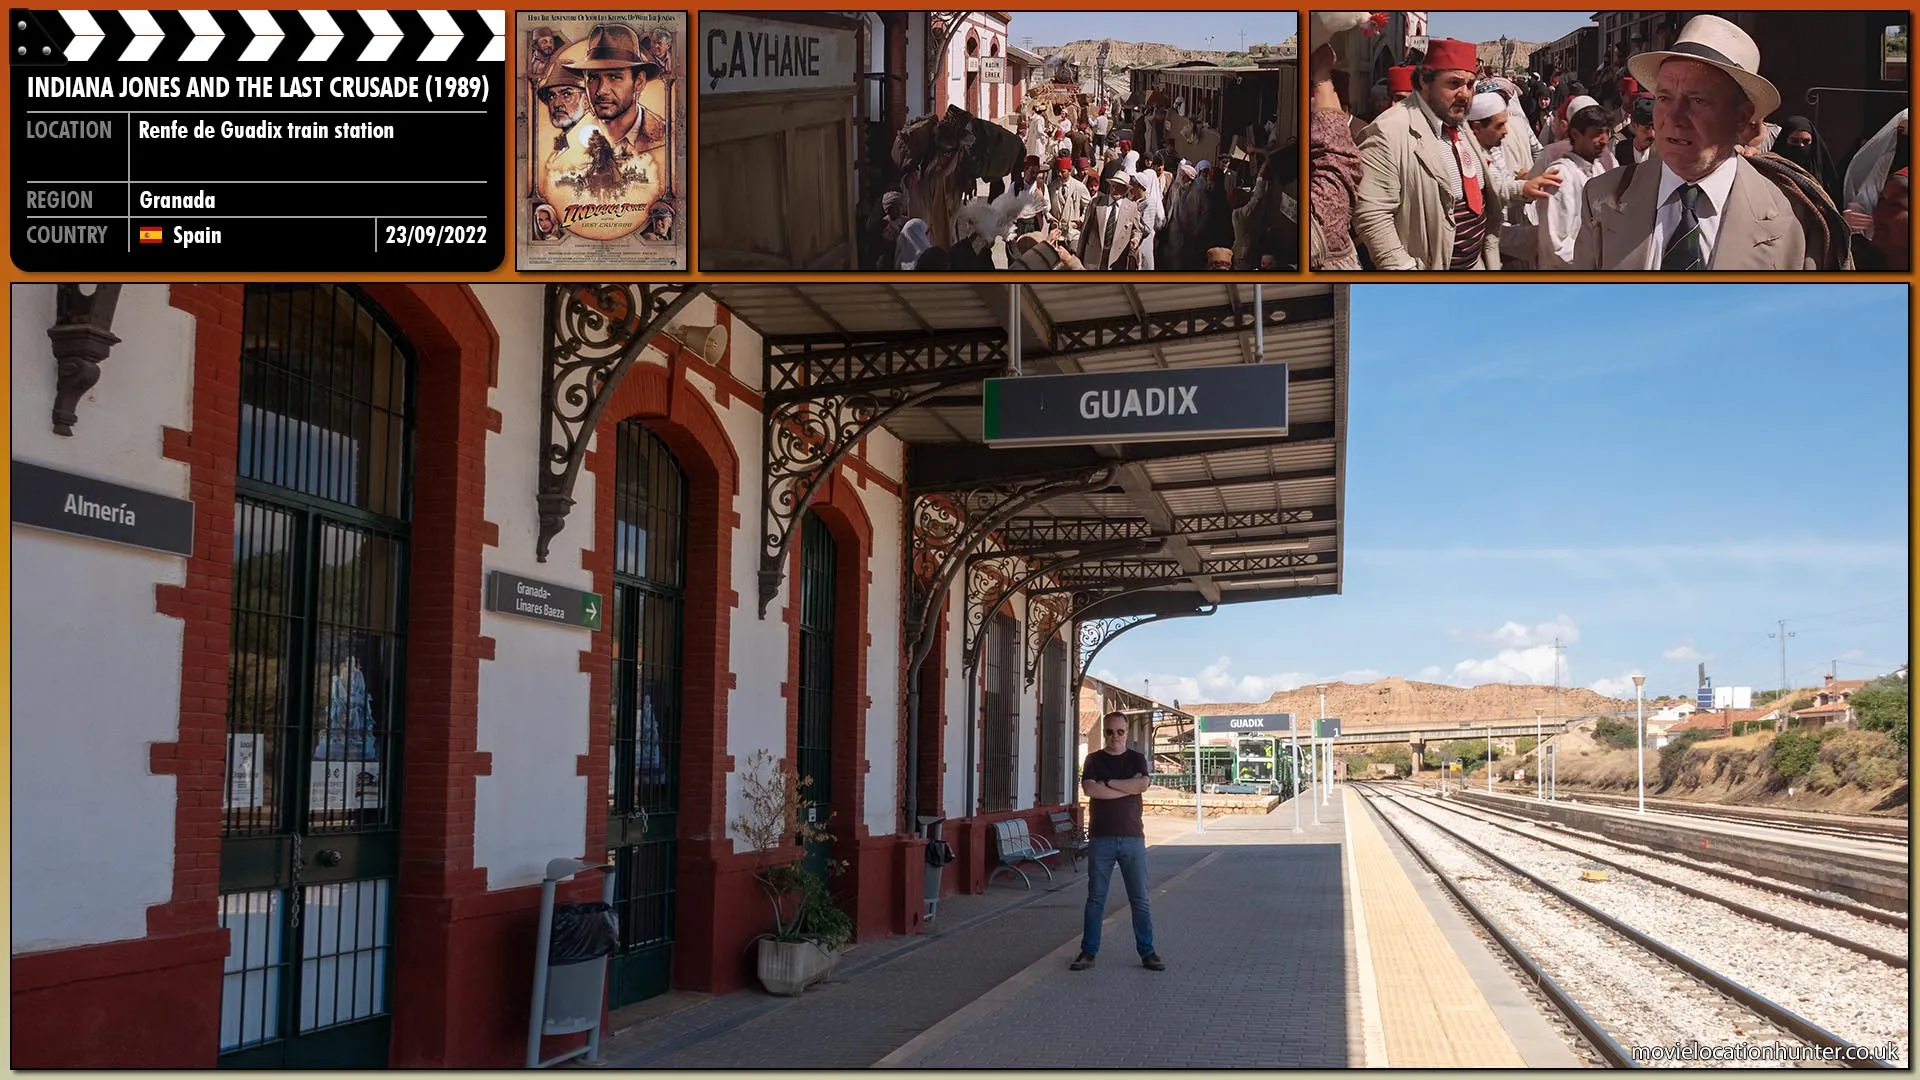 Filming location photo, shot in Spain, for Indiana Jones and the Last Crusade (1989). Scene description: Brody (Denholm Elliott) disembarks from the train along with the other passengers, a cross-section of Arabs and Tusks. Locals surround Brody trying to sell their wares.  Sallah (John Rhys-Davies) shoulders his way through the mob toward Brody. They meet and hug, then begin to walk.